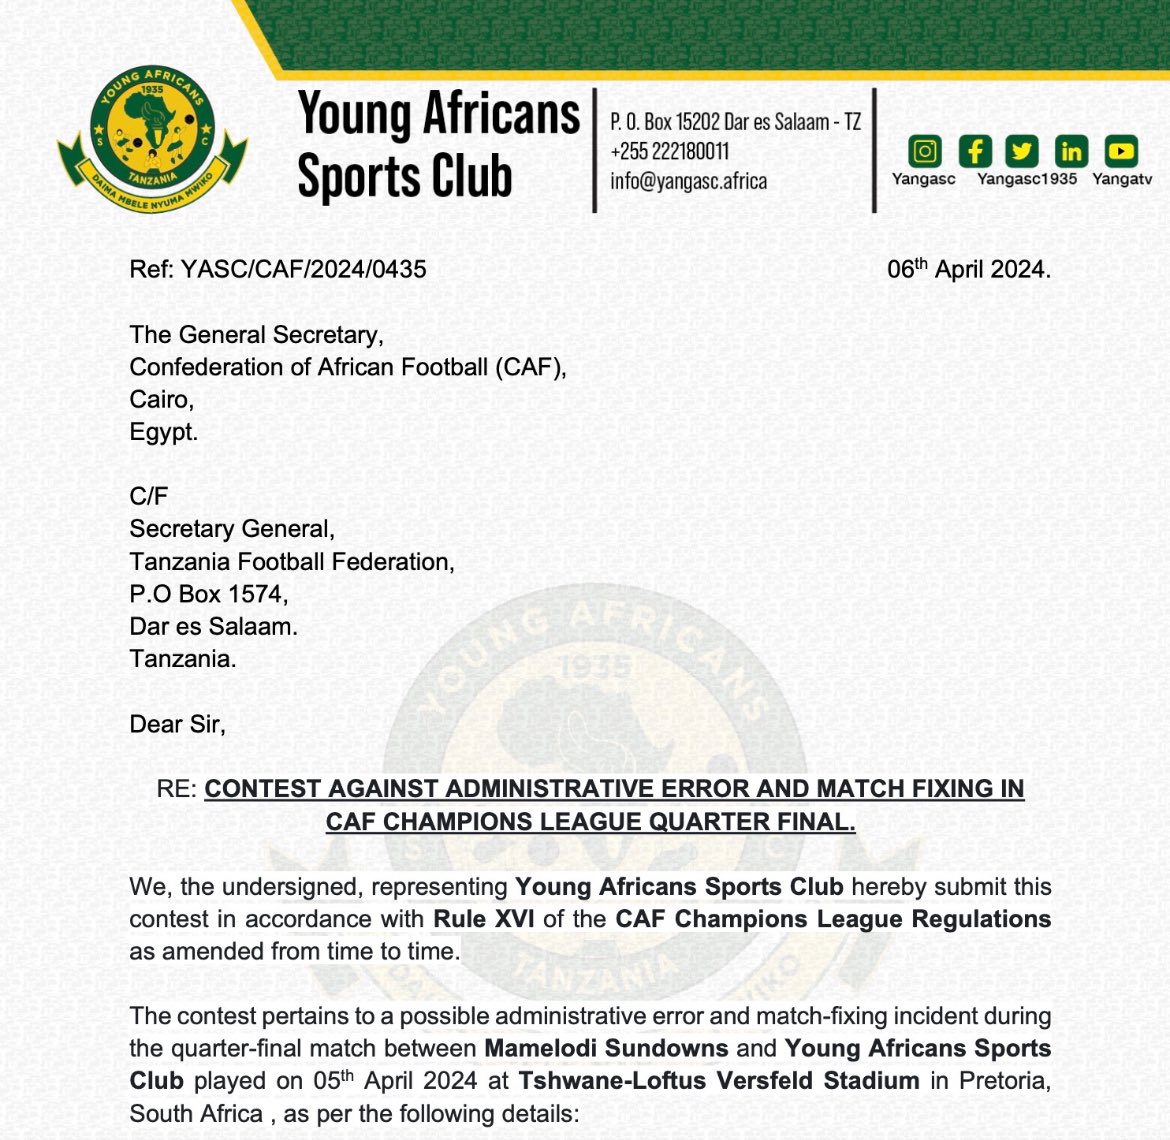 JUSTIFIED | In an emotionally charged letter, the Young Africans Sports Club have lodged a case of match-fixing against Mamelodi Sundowns, a team owned by Patrice Motsepe, to CAF led by Patrice Motsepe.